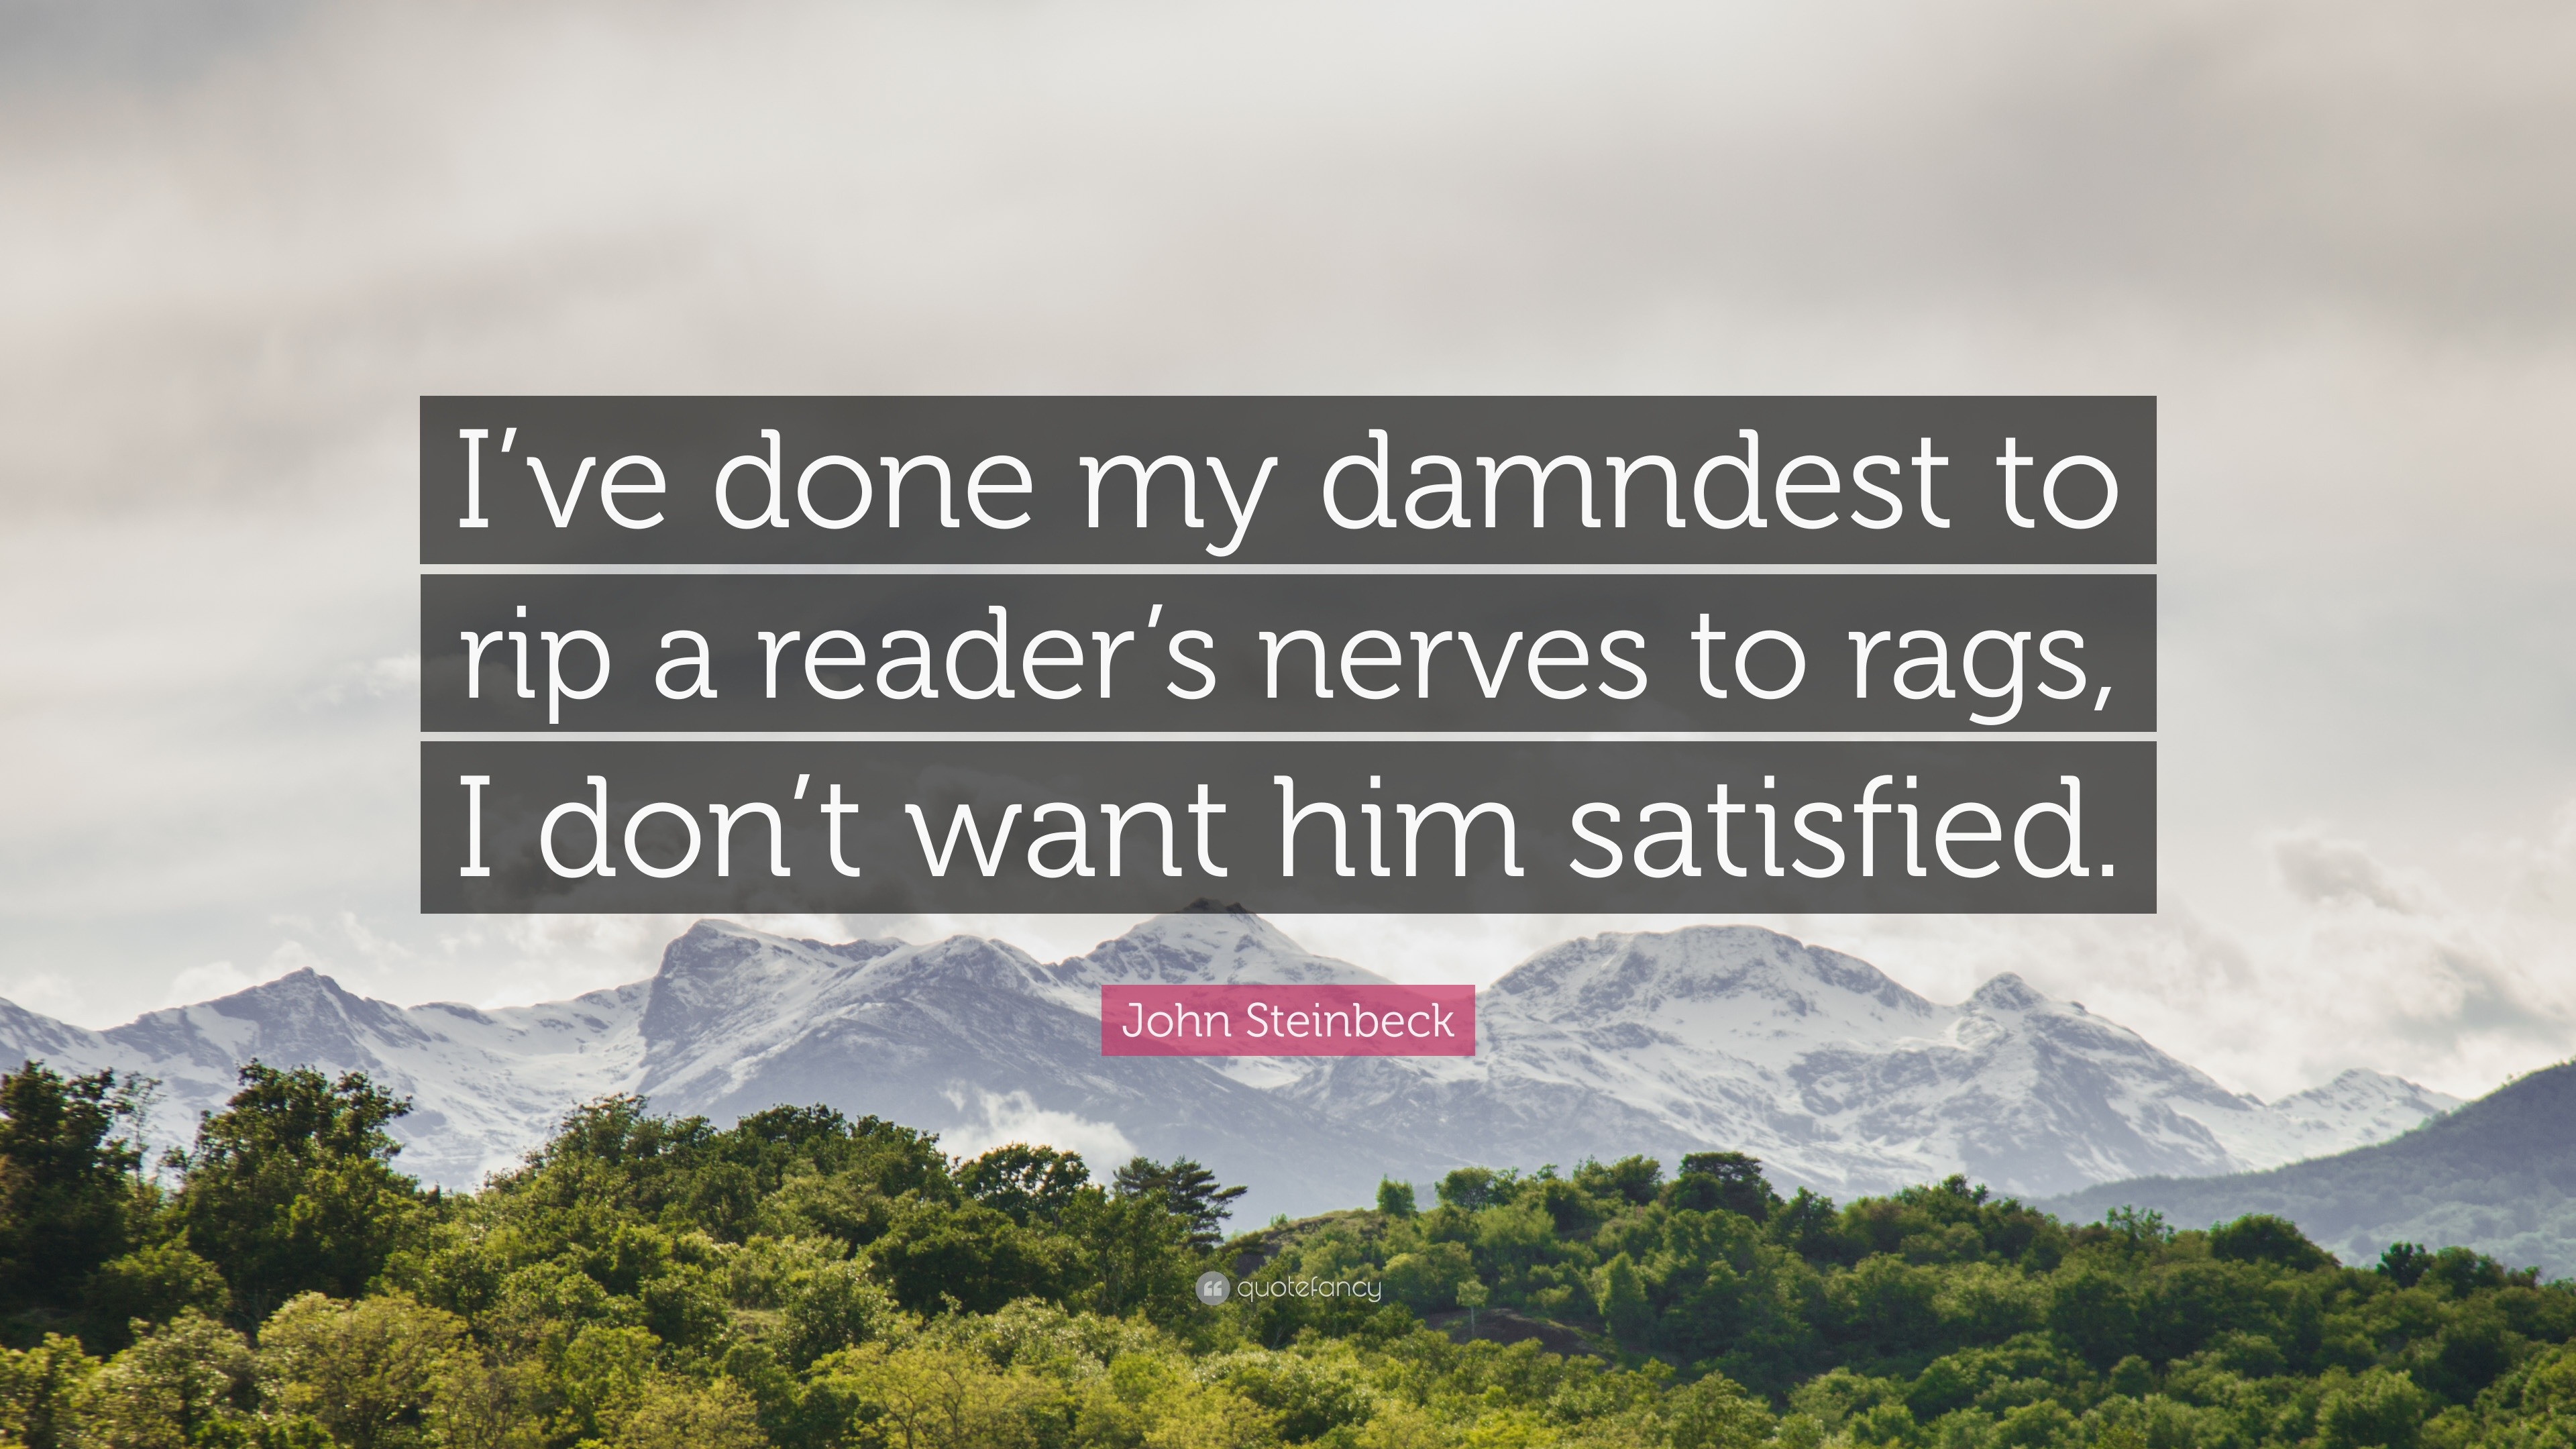 John Steinbeck Quote: “I've done my damndest to rip a reader's